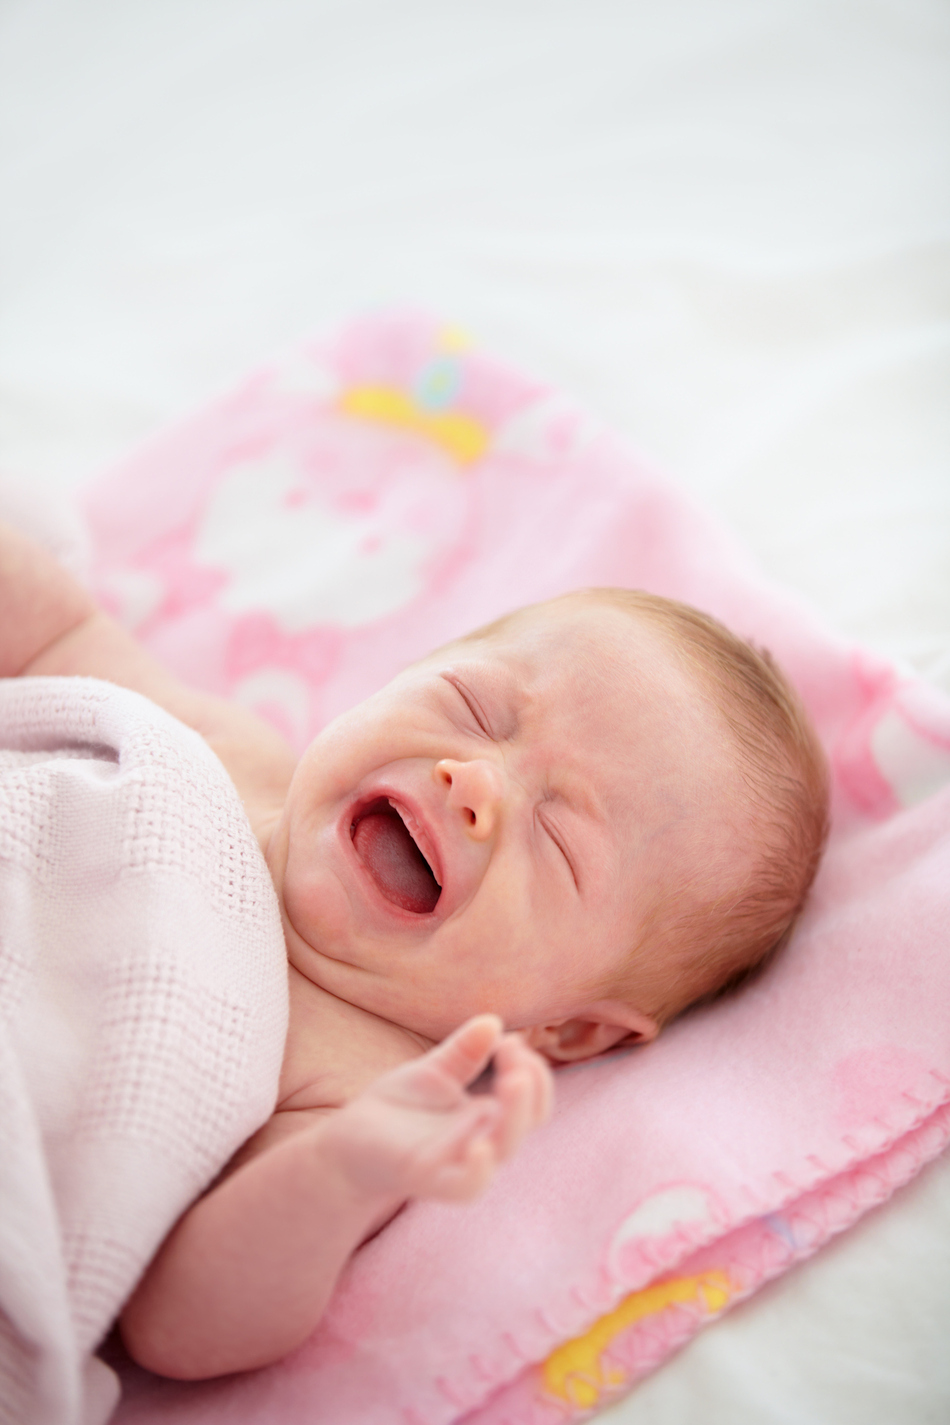 How Much Crying is Normal for My Newborn?